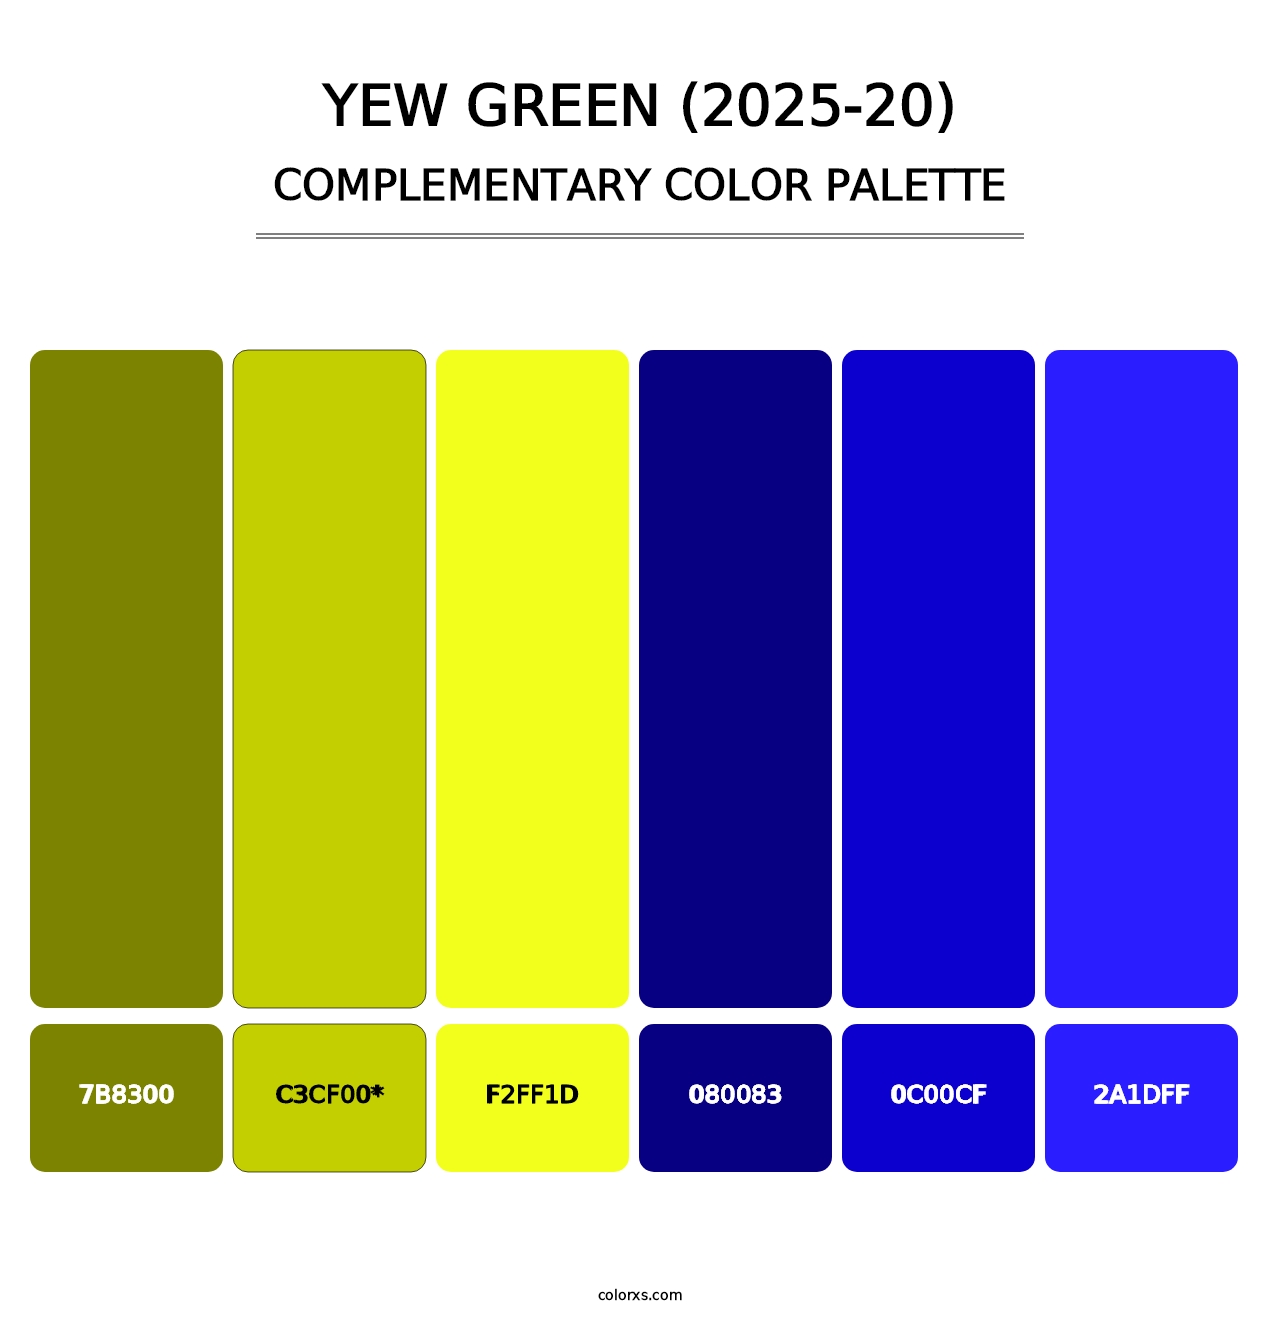 Yew Green (2025-20) - Complementary Color Palette